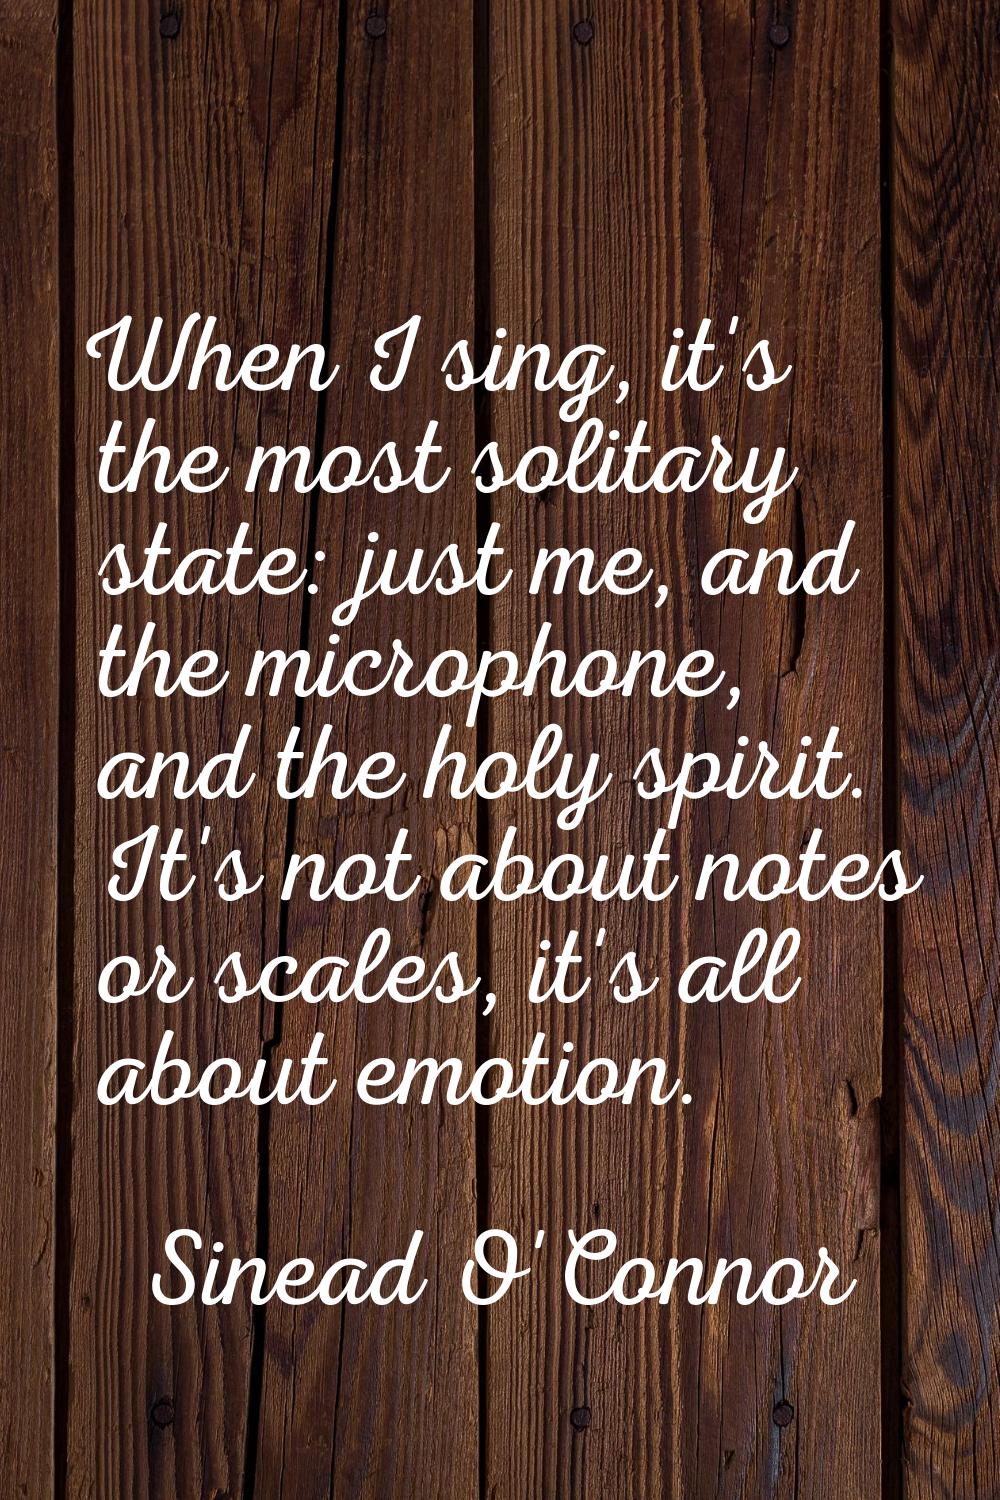 When I sing, it's the most solitary state: just me, and the microphone, and the holy spirit. It's n